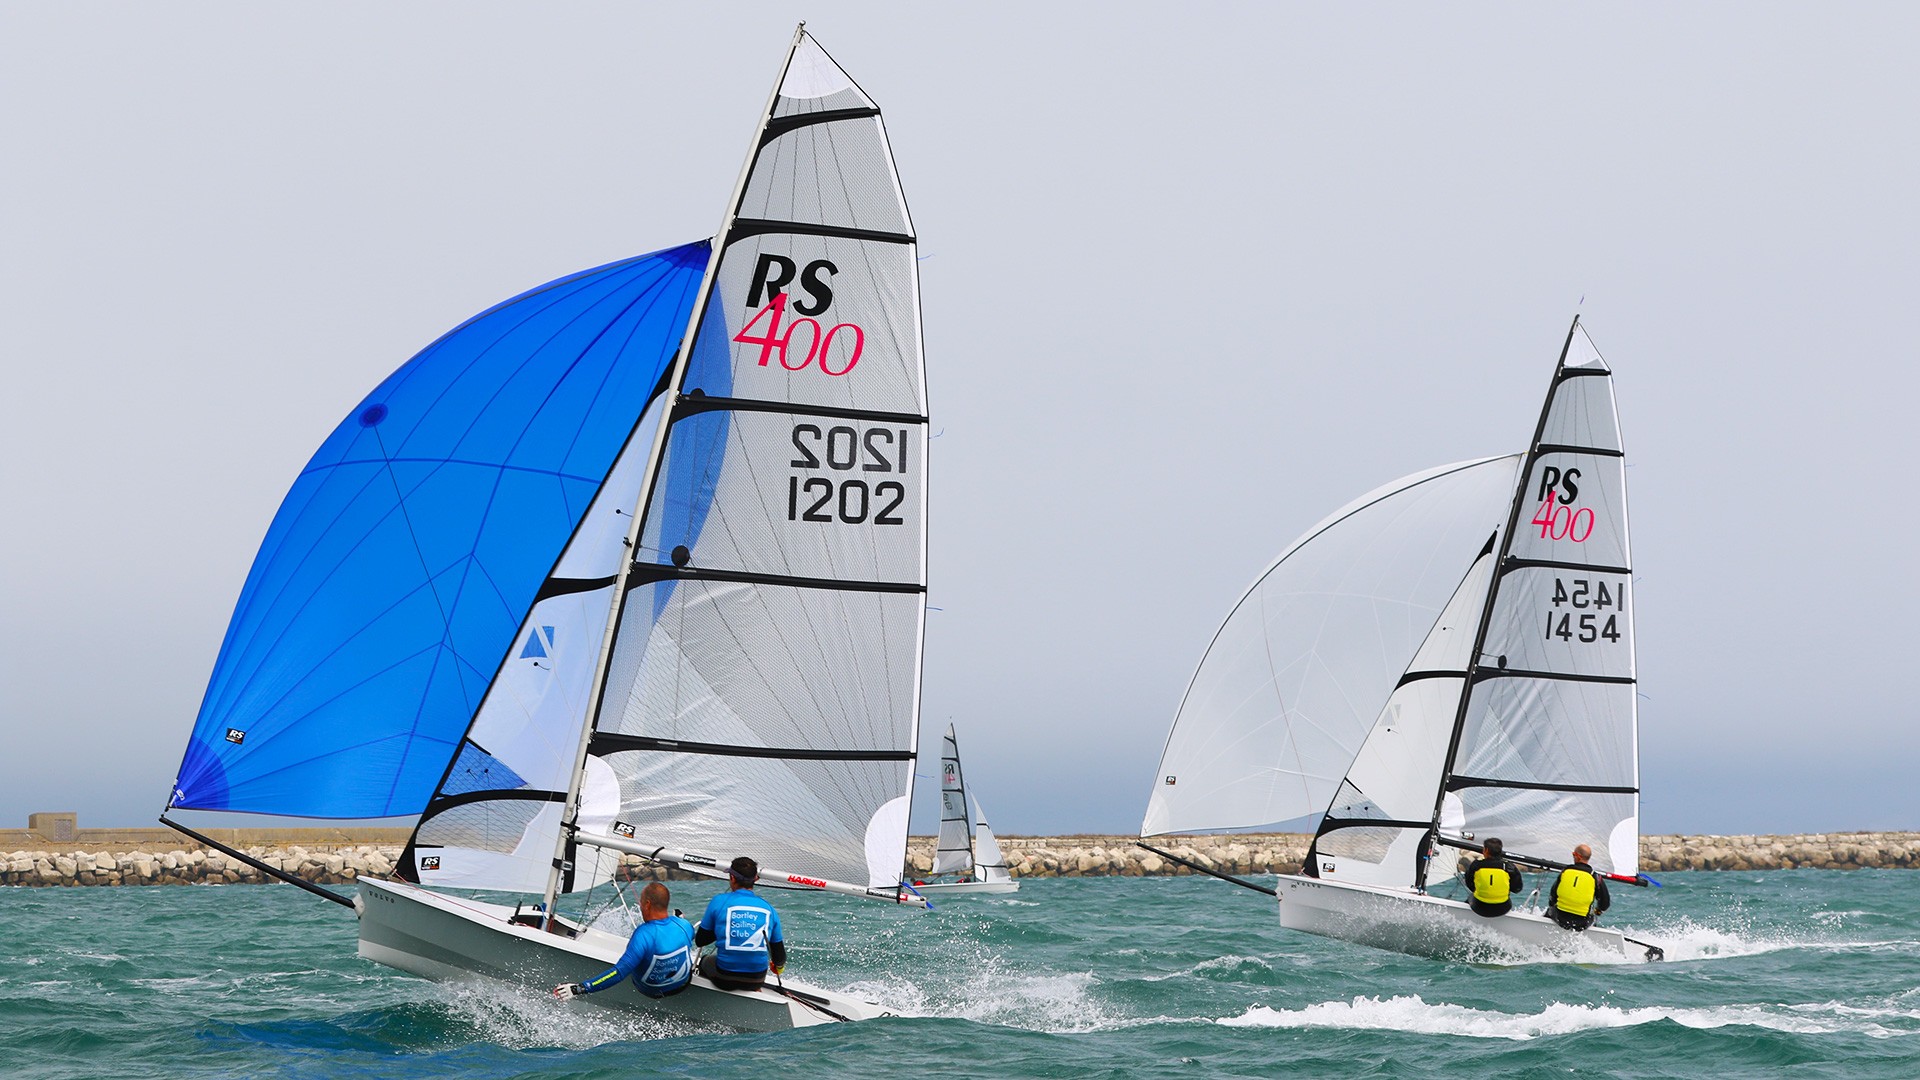 Two RS400 Sailing Dinghy racing downwind with their blue and white asymmetric kites up. Going very fast!